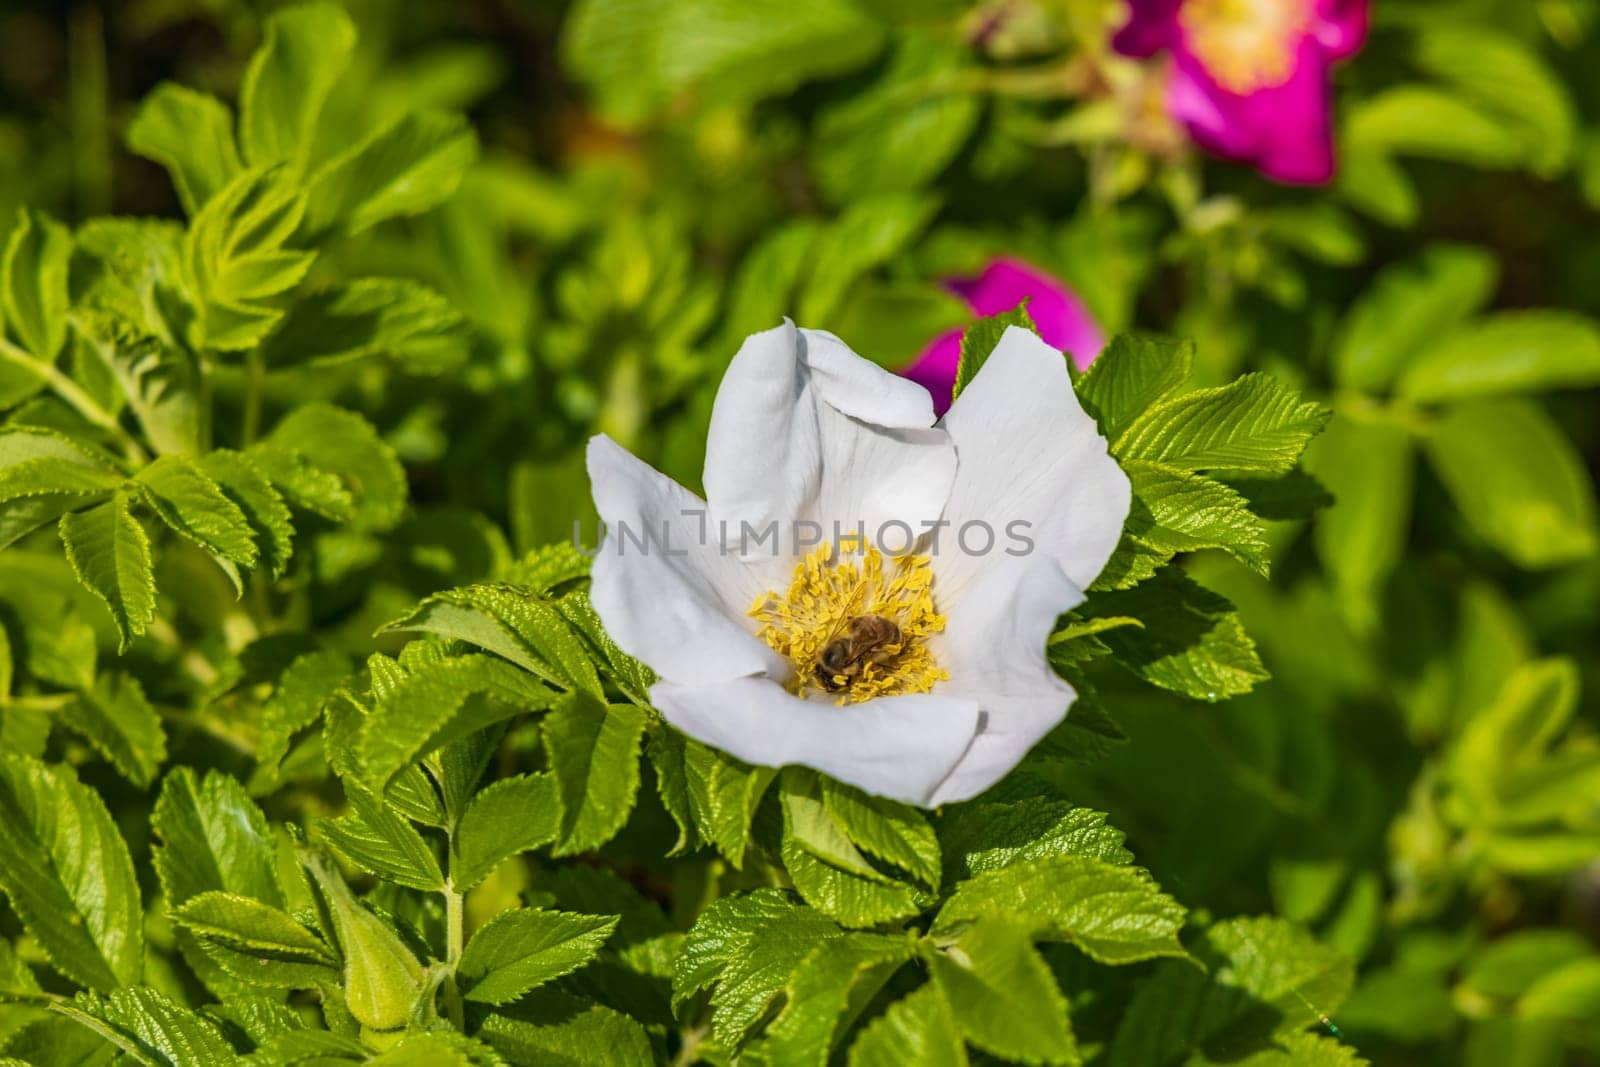 Tiny bee walking and gathering flower pollen inside the beautiful white and yellow flower which is growing on small clearing with green bushes around